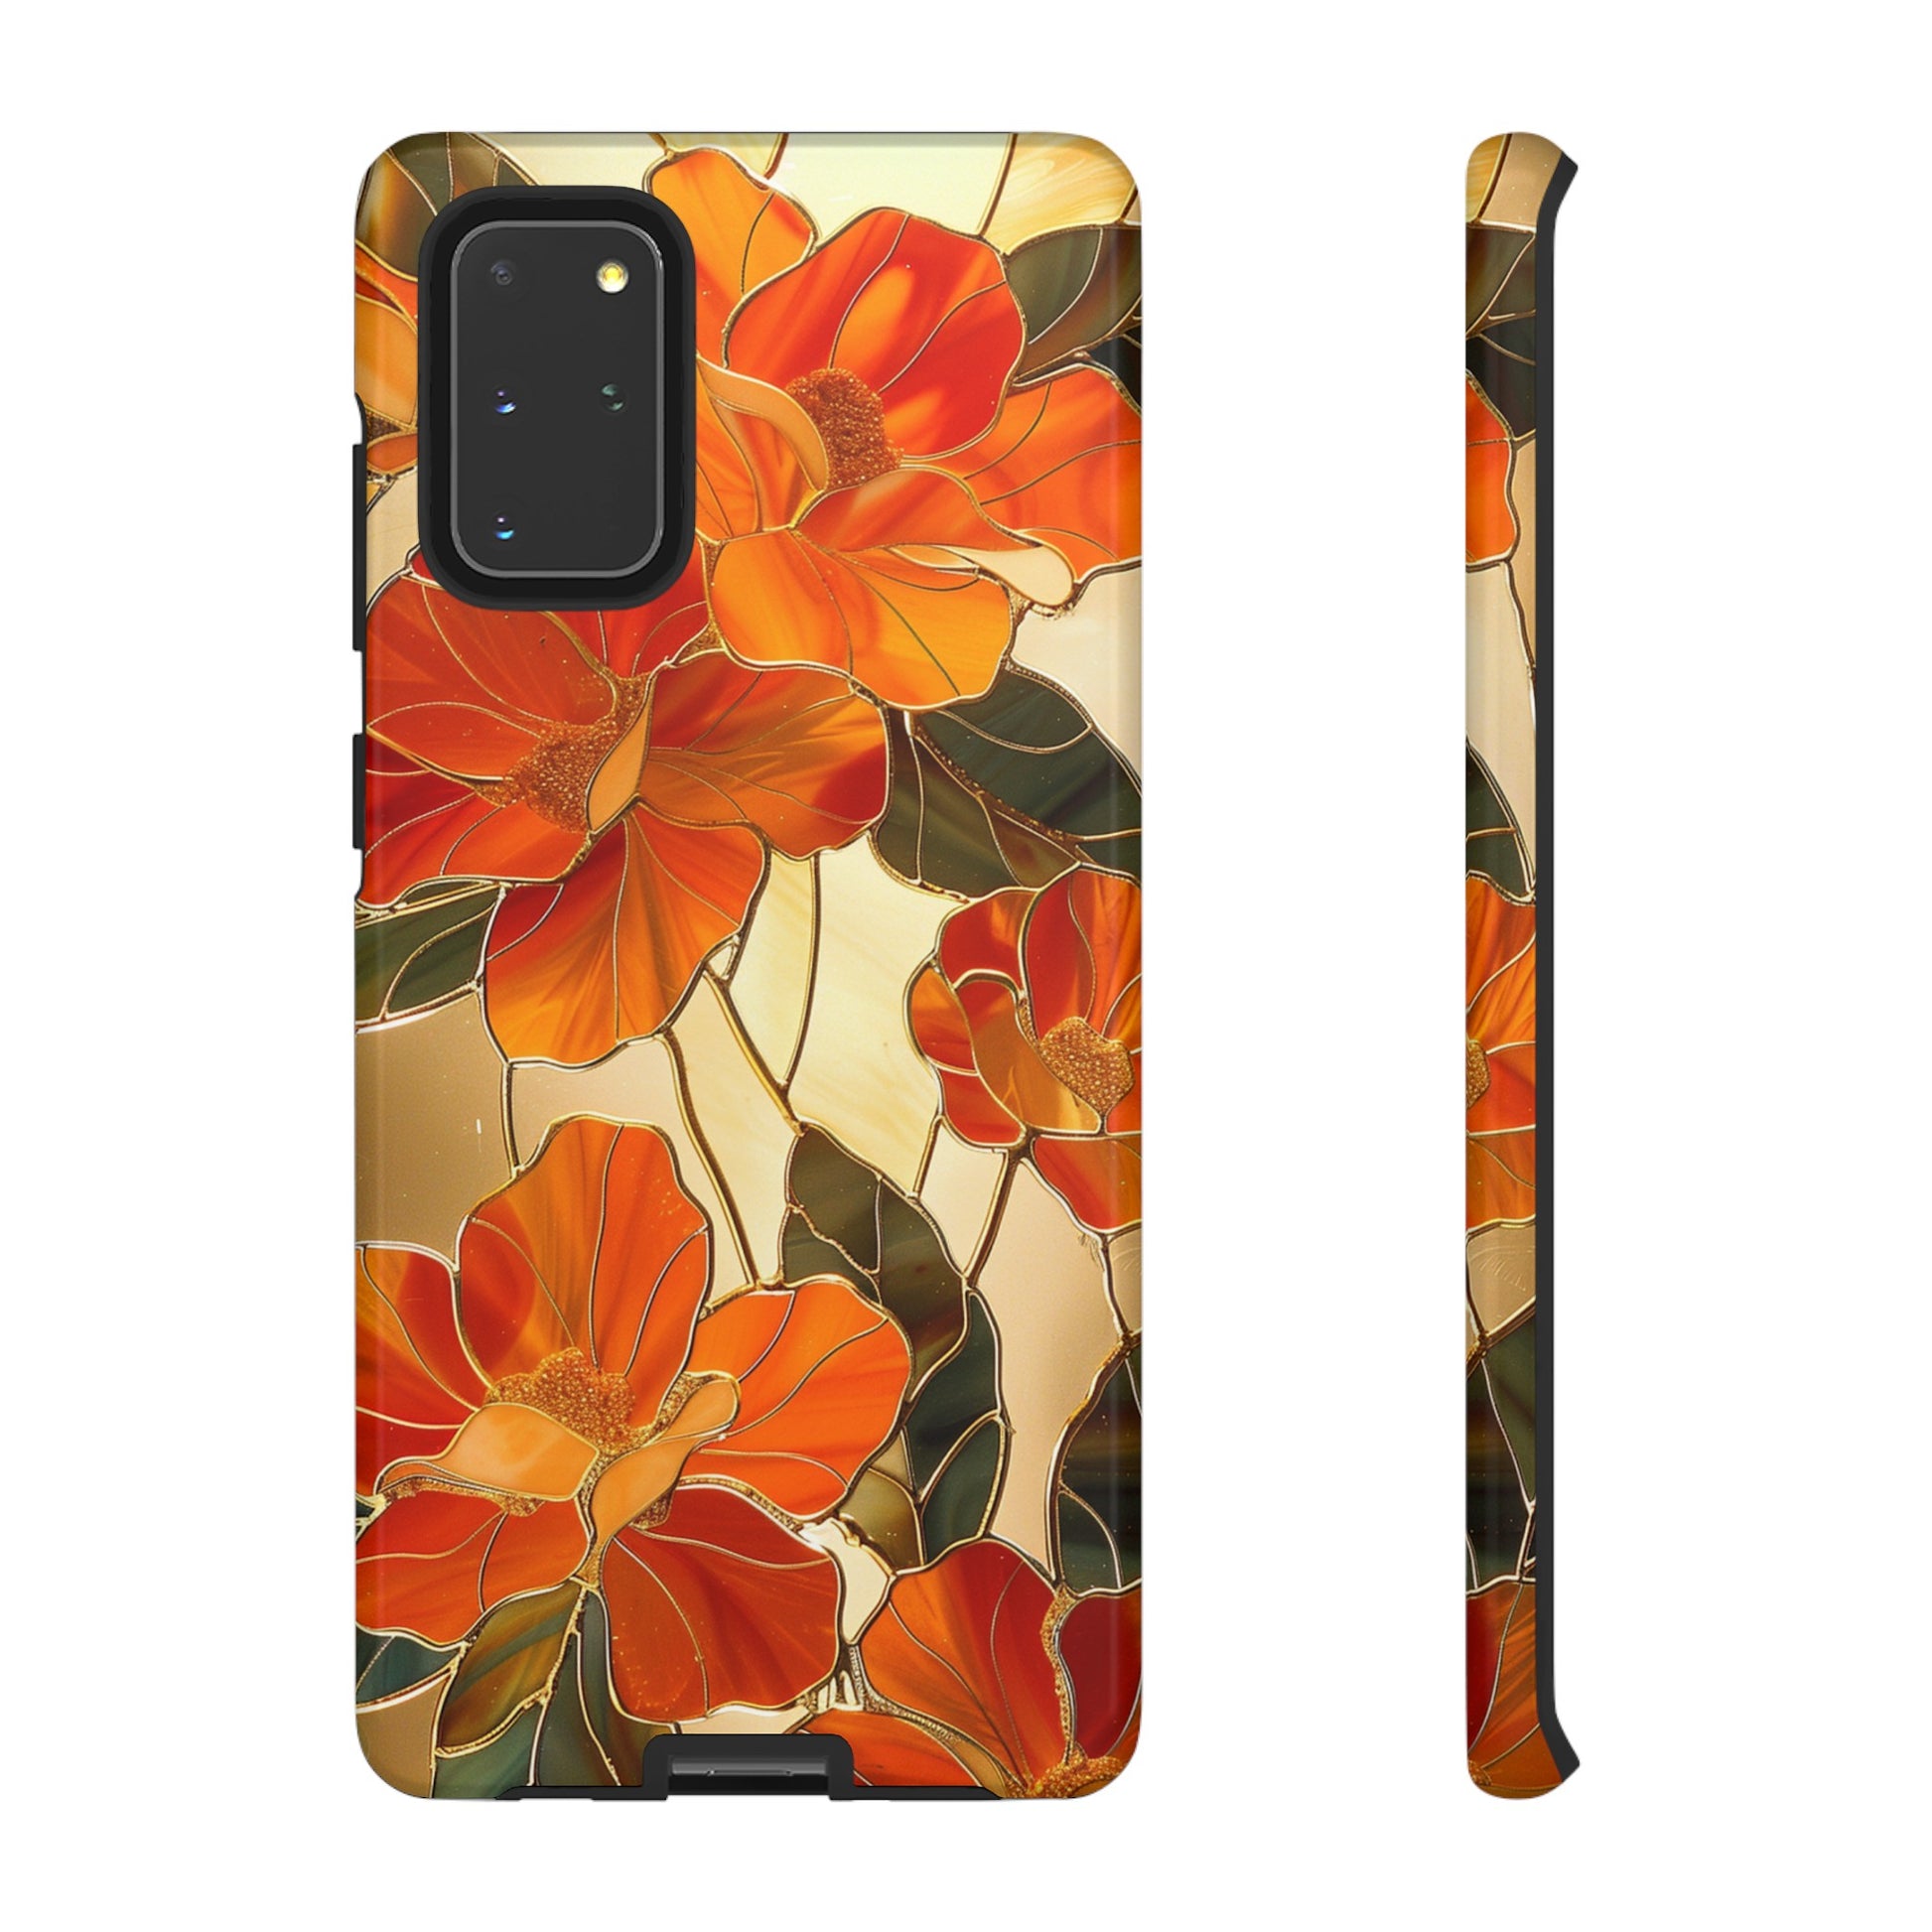 Orange stained glass design phone cover for iPhone 12